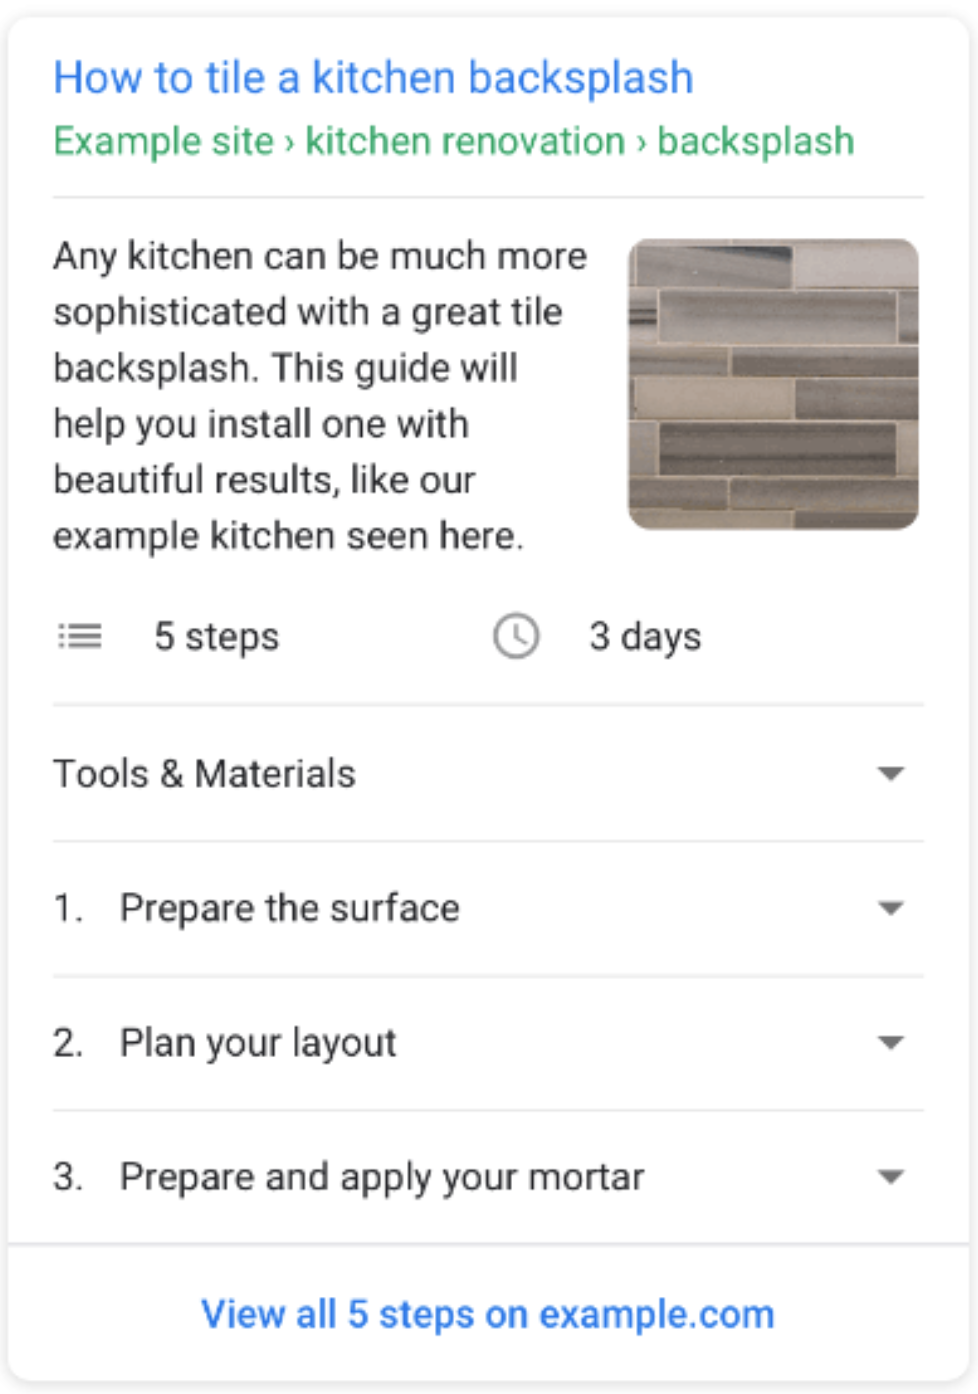 How to tile a kitchen rich snippet on Google